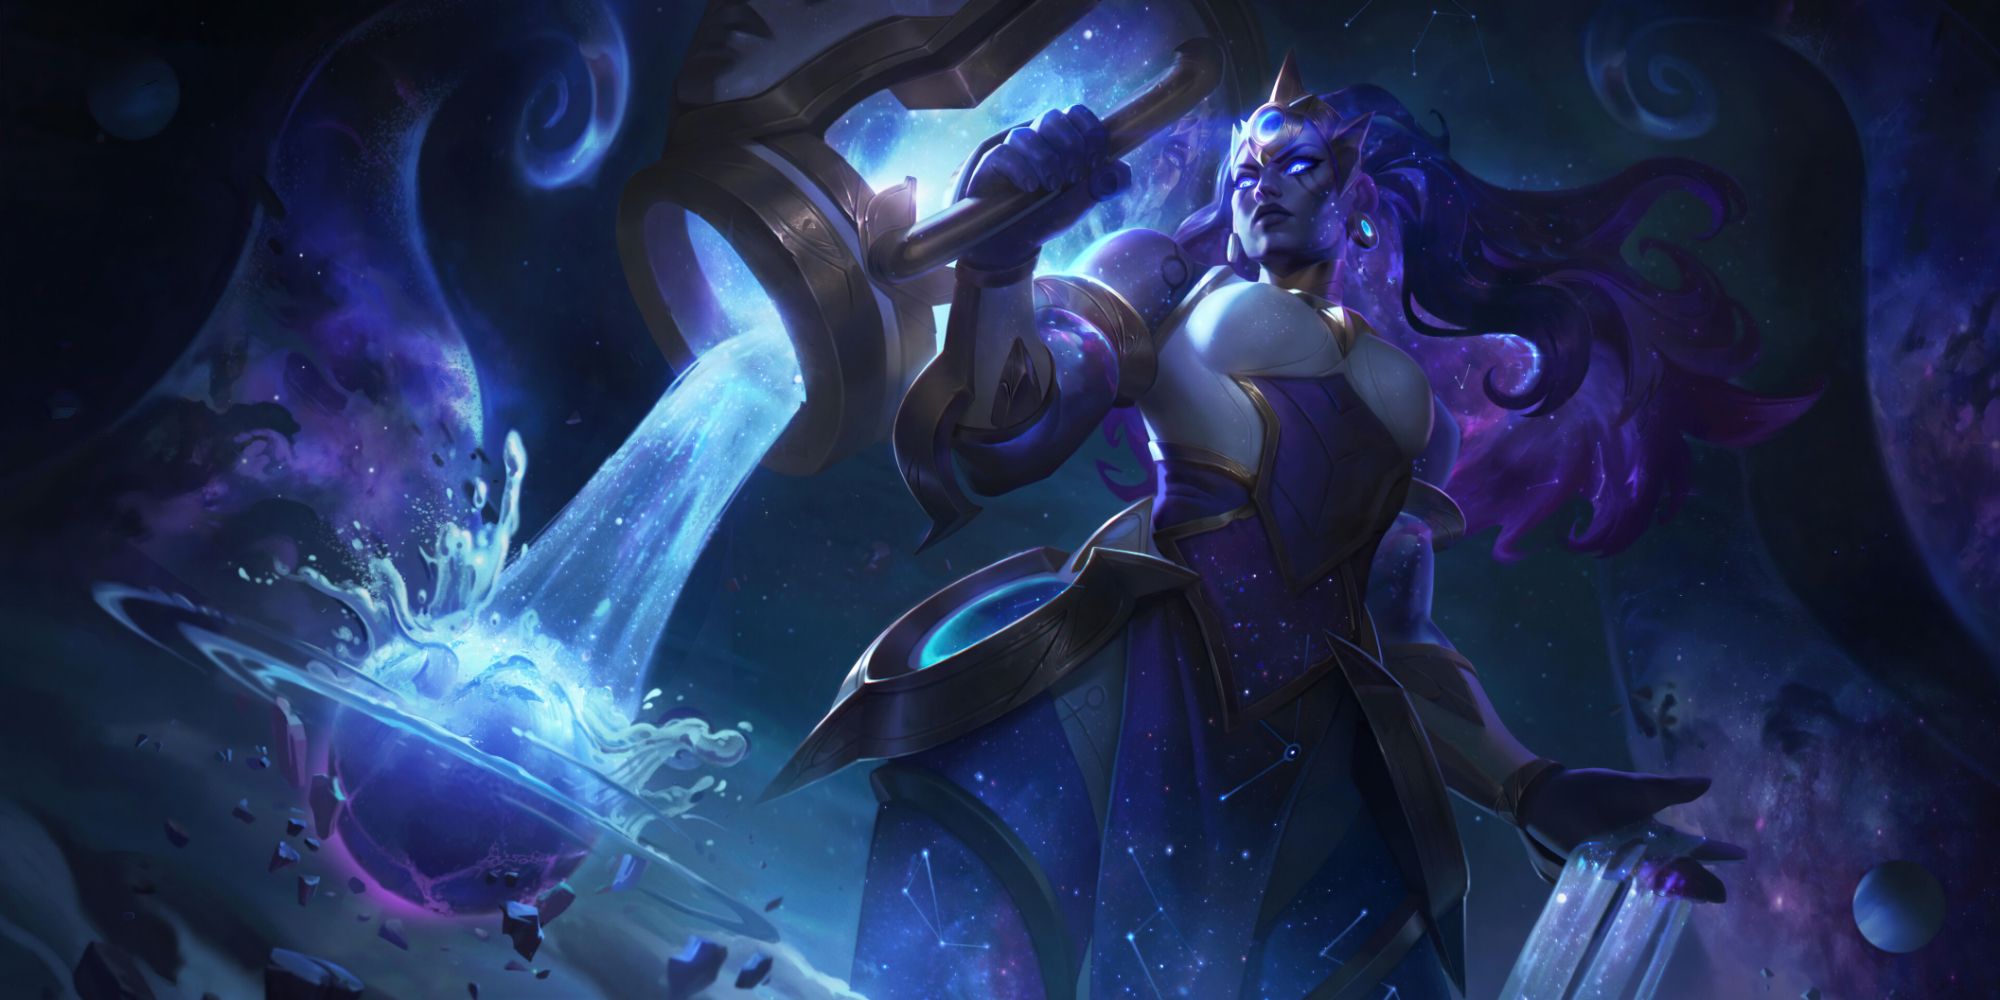 Cosmic Invoker Illaoi looking like a representation of Aquarius, the water bearer, as she pours water on a planet